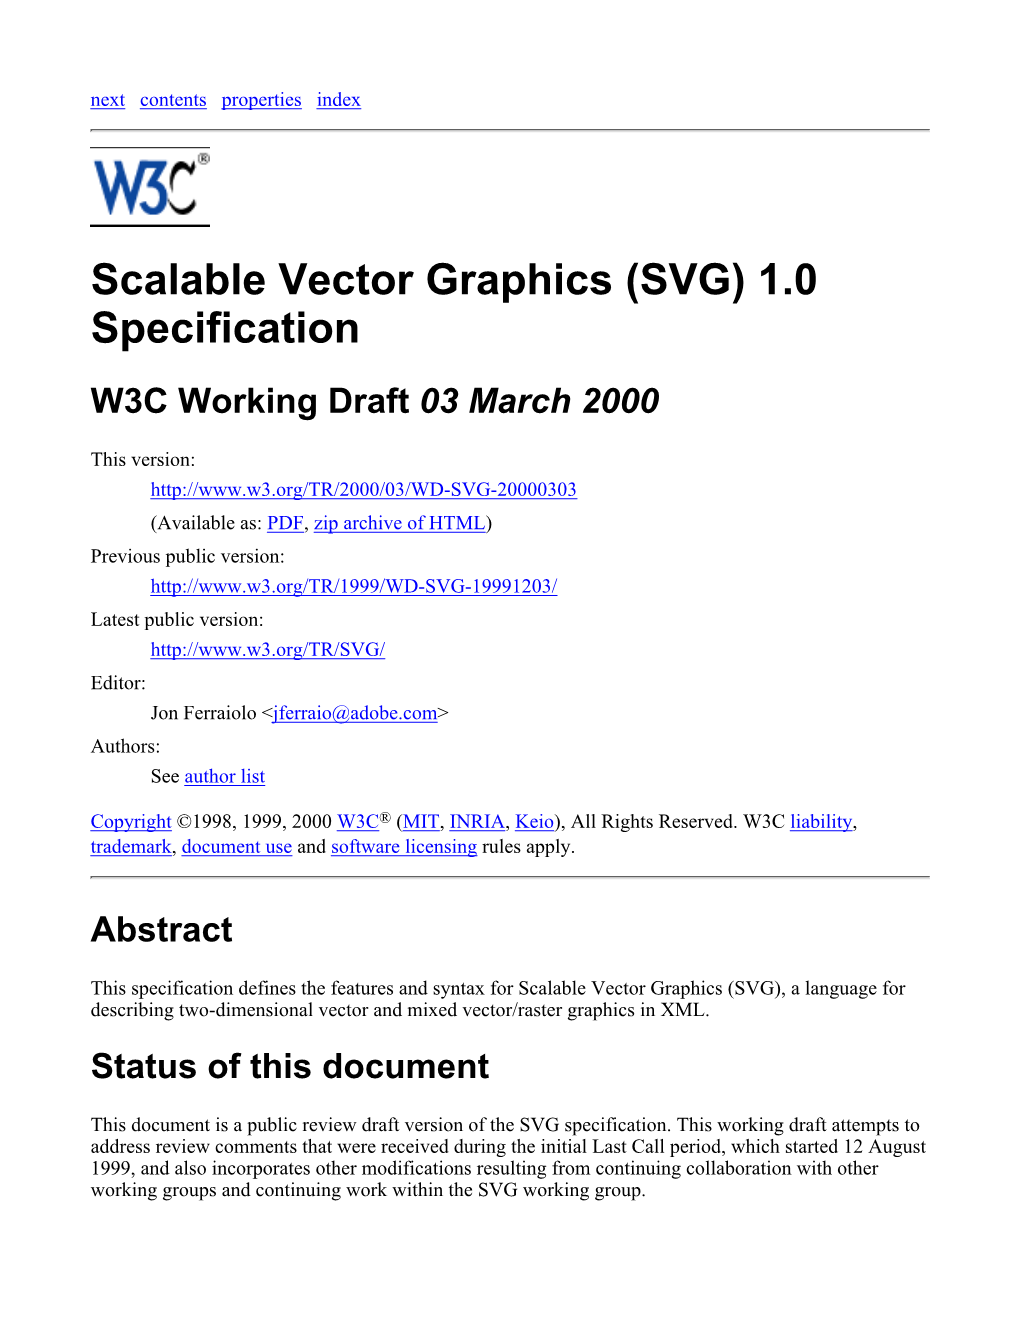 W3C Working Draft: Scalable Vector